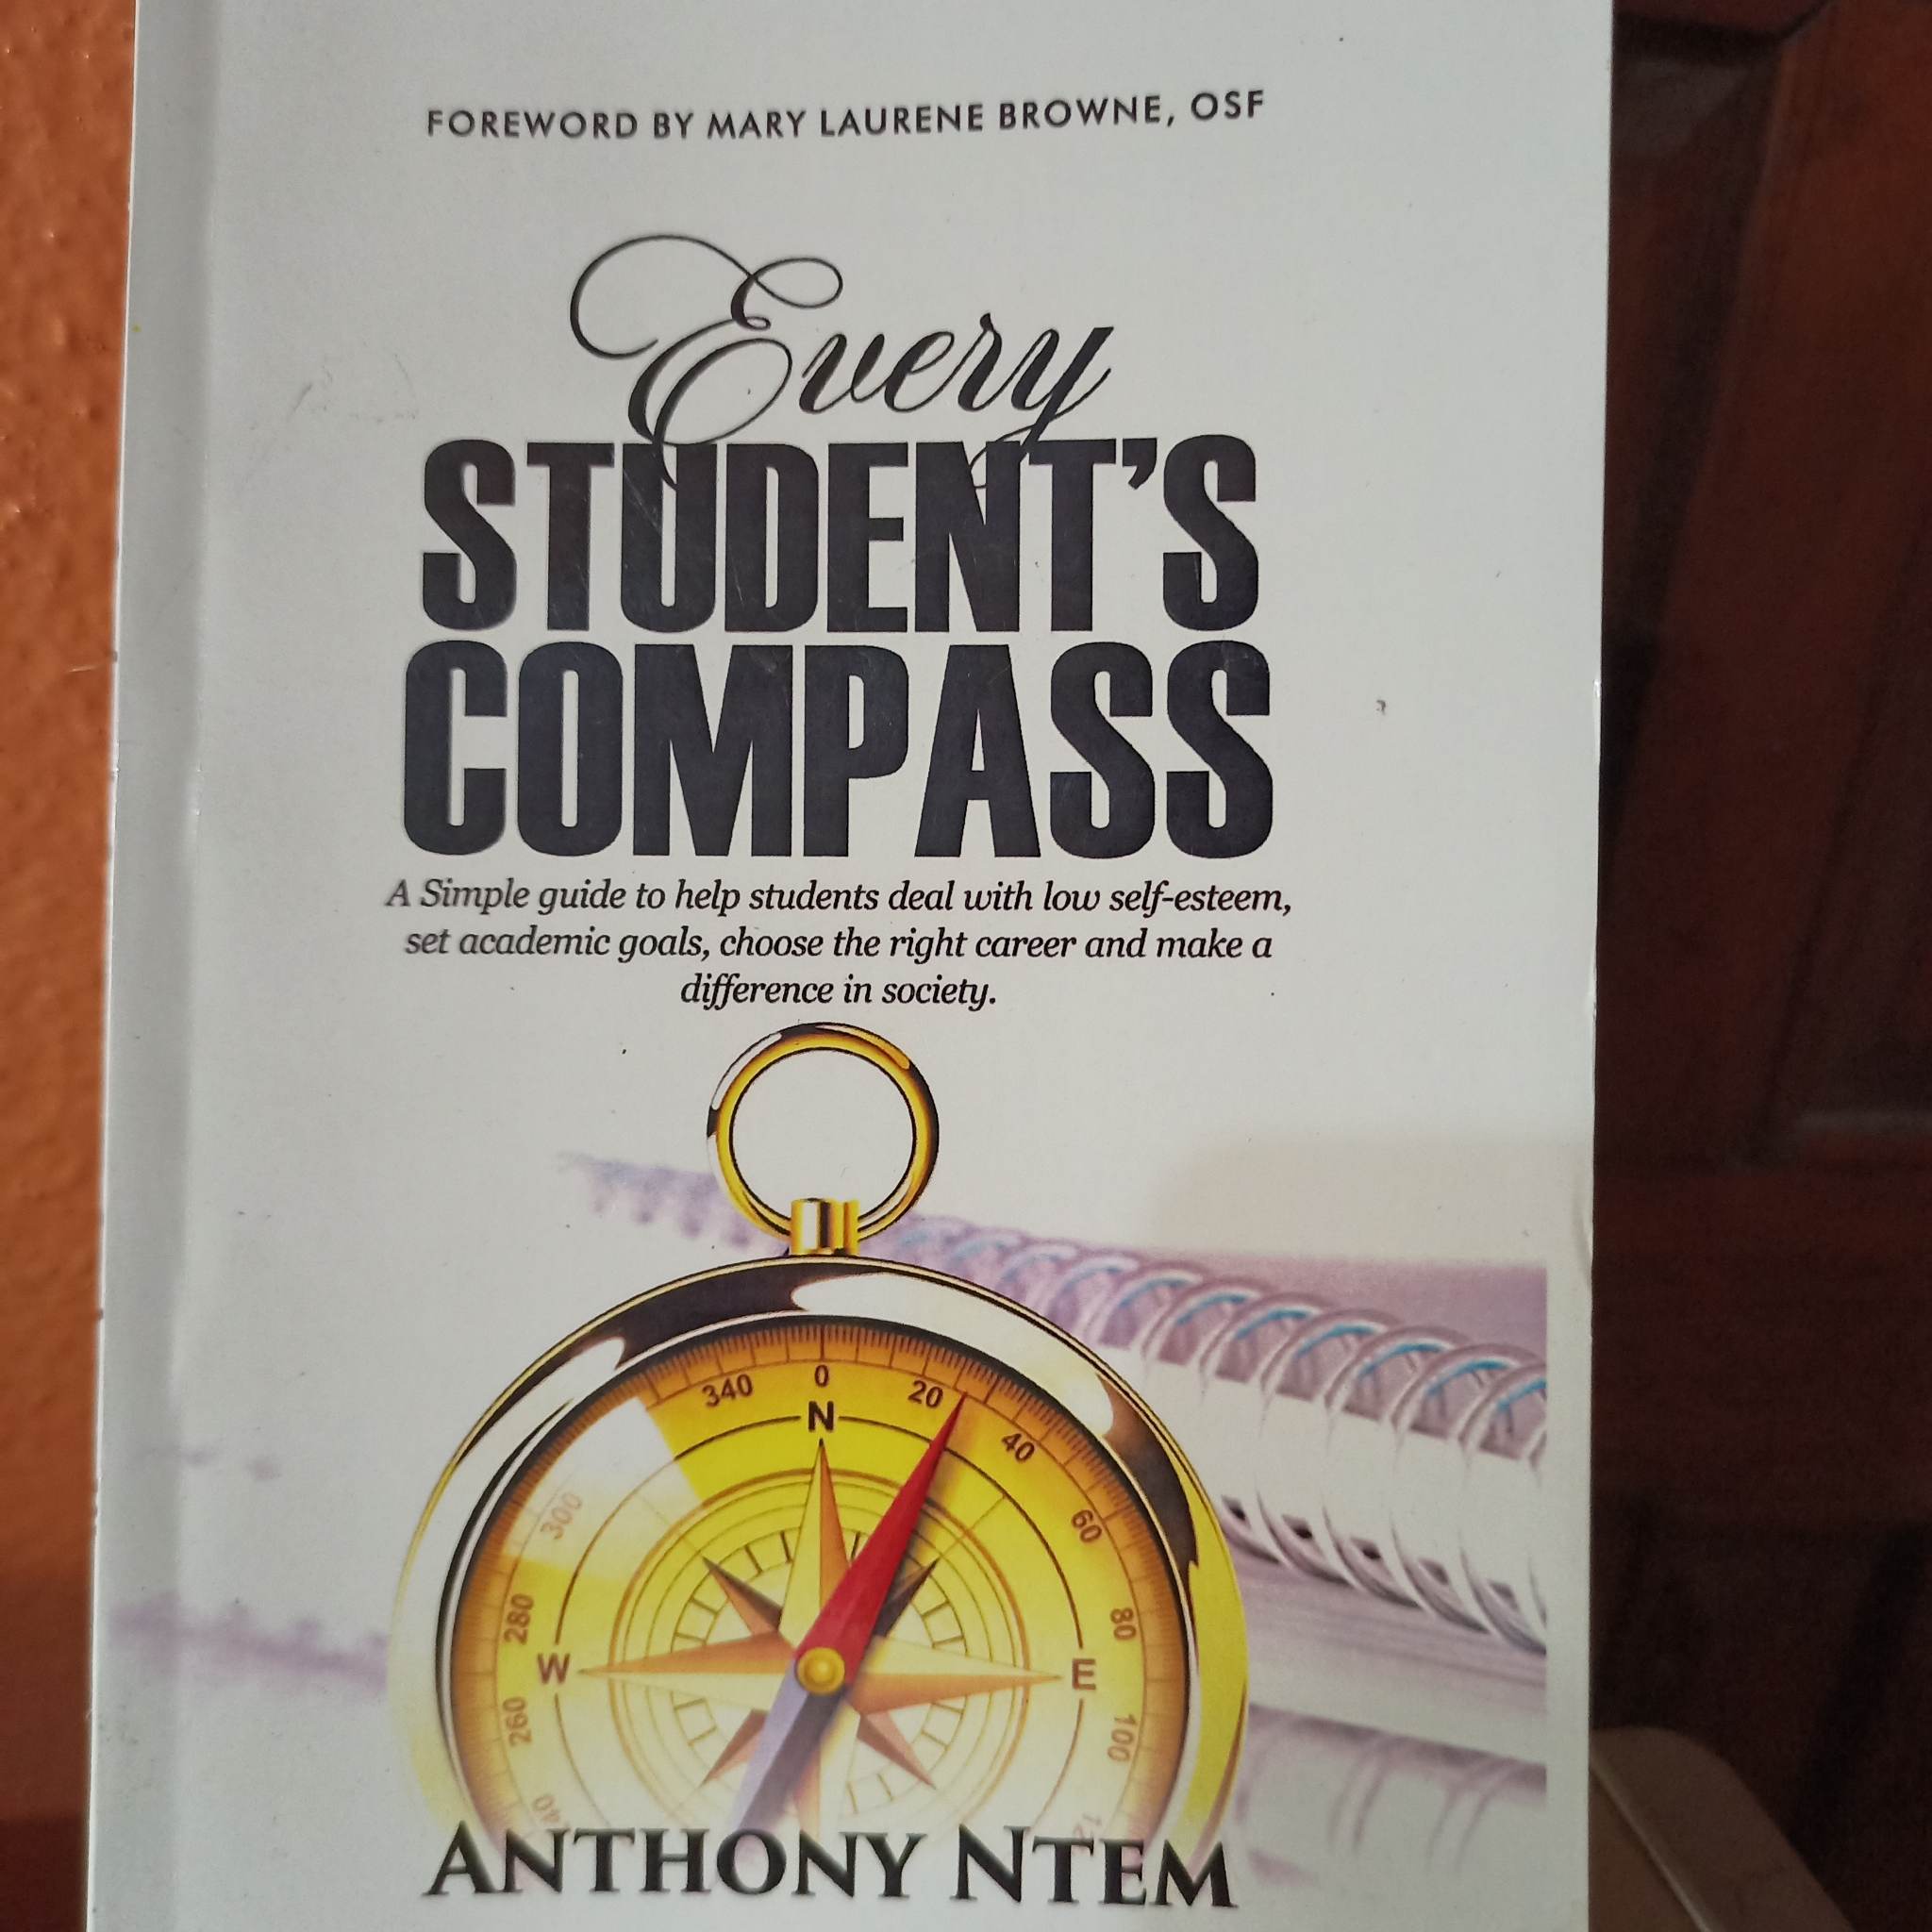 Every Student's Compass is worth reading!  If anyone wants a copy of this book let Daniel Coleman know where you can get it.